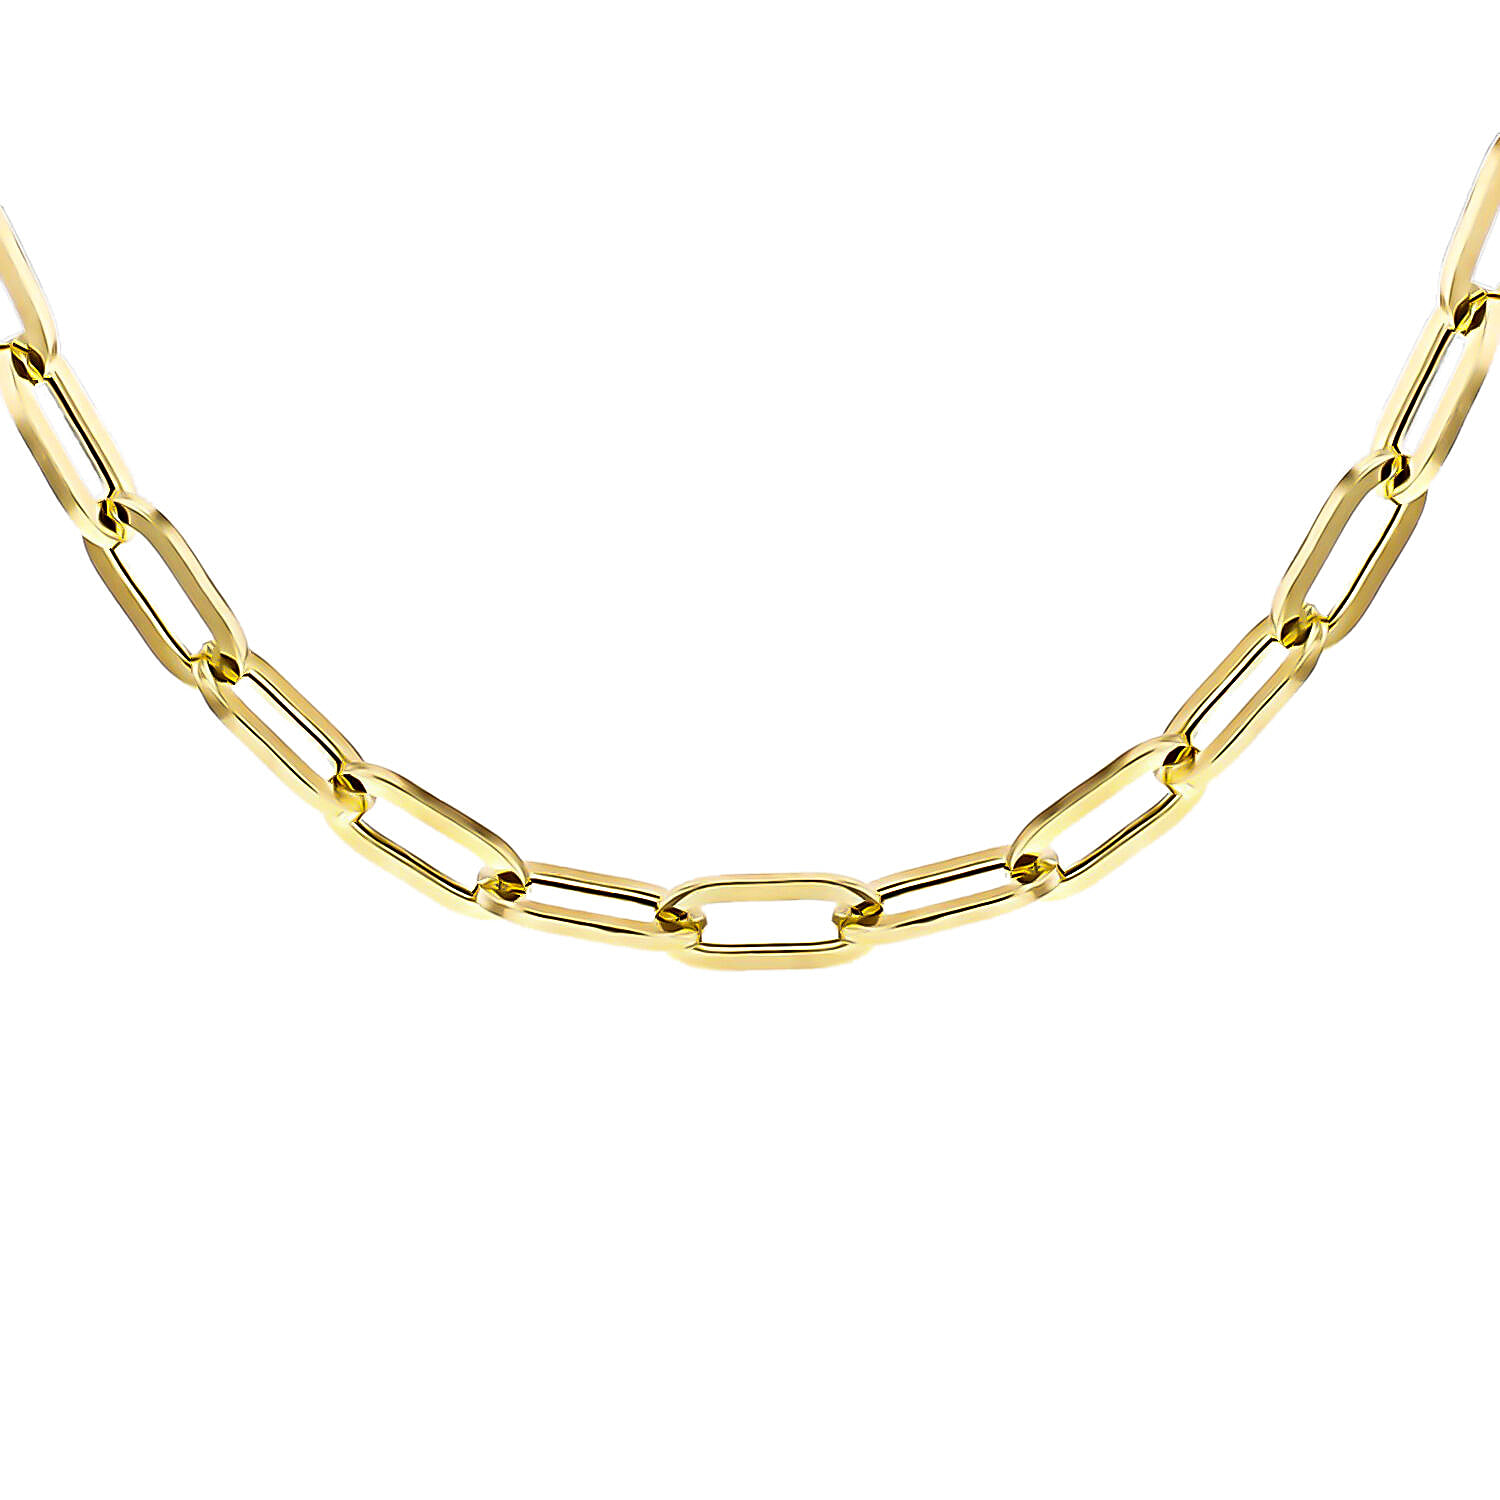 Italian Made Close Out Deal- 9K Yellow Gold Paper Clip Necklace (Size 24) With Lobster Clasp, Gold Wt. 11.80 Gms 